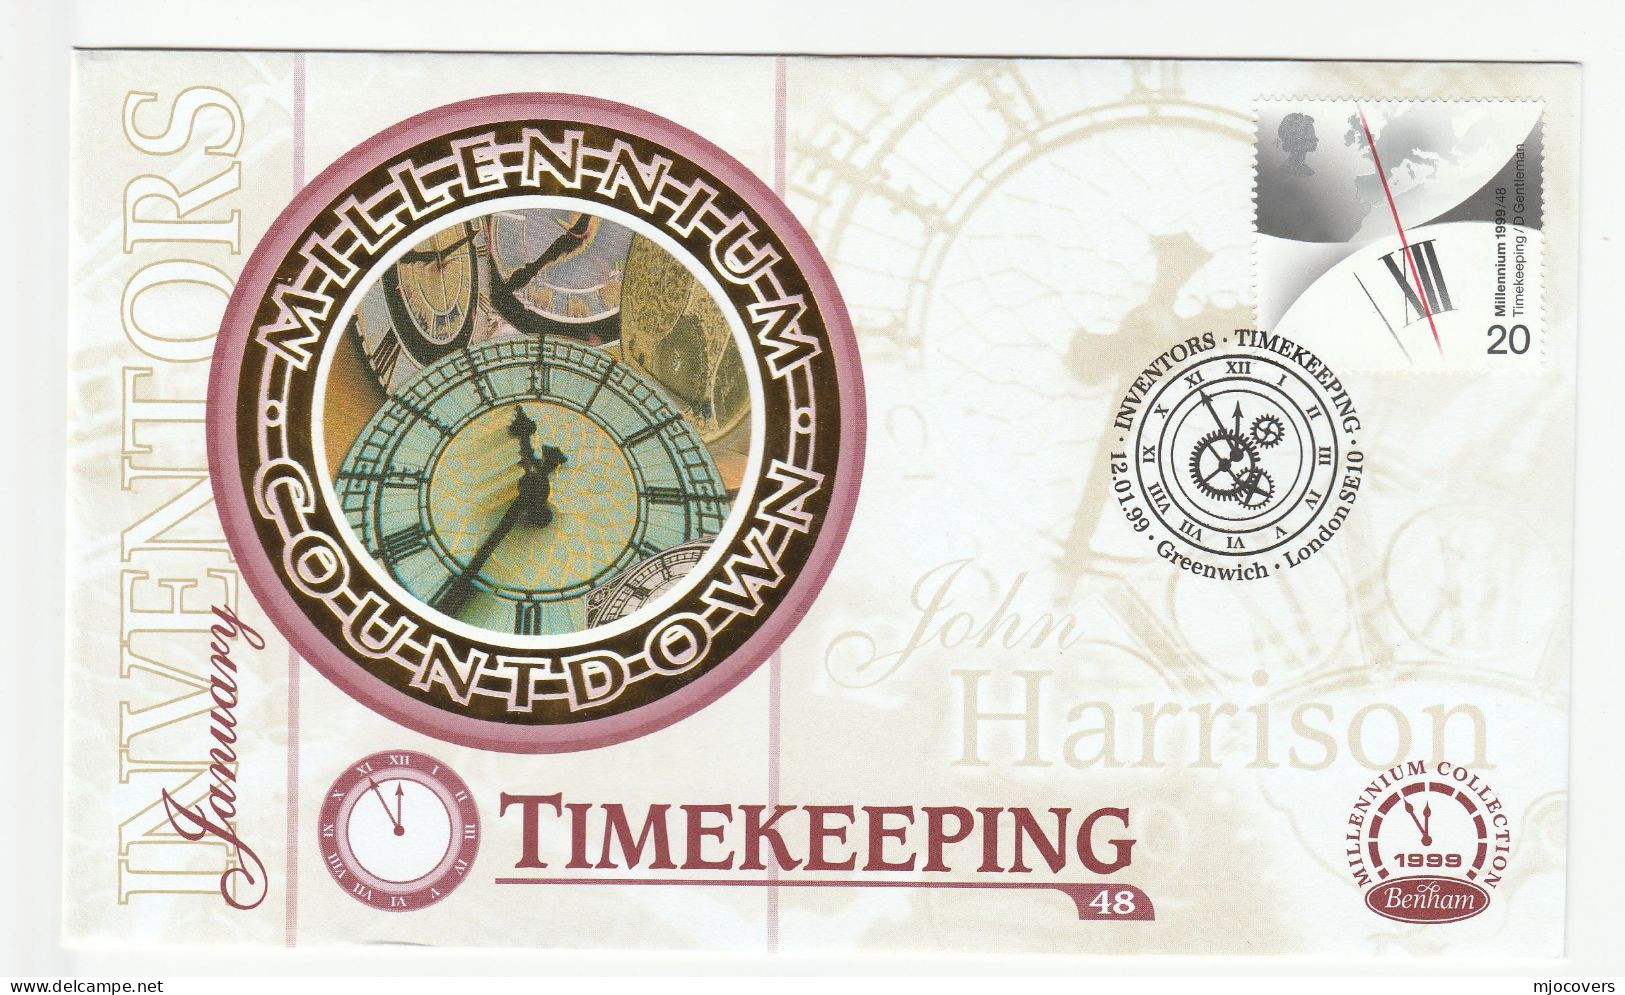 CLOCK  Special SILK  GREENWICH  FDC 1999 Timekeeping Stamps  GB Cover Clocks - Uhrmacherei